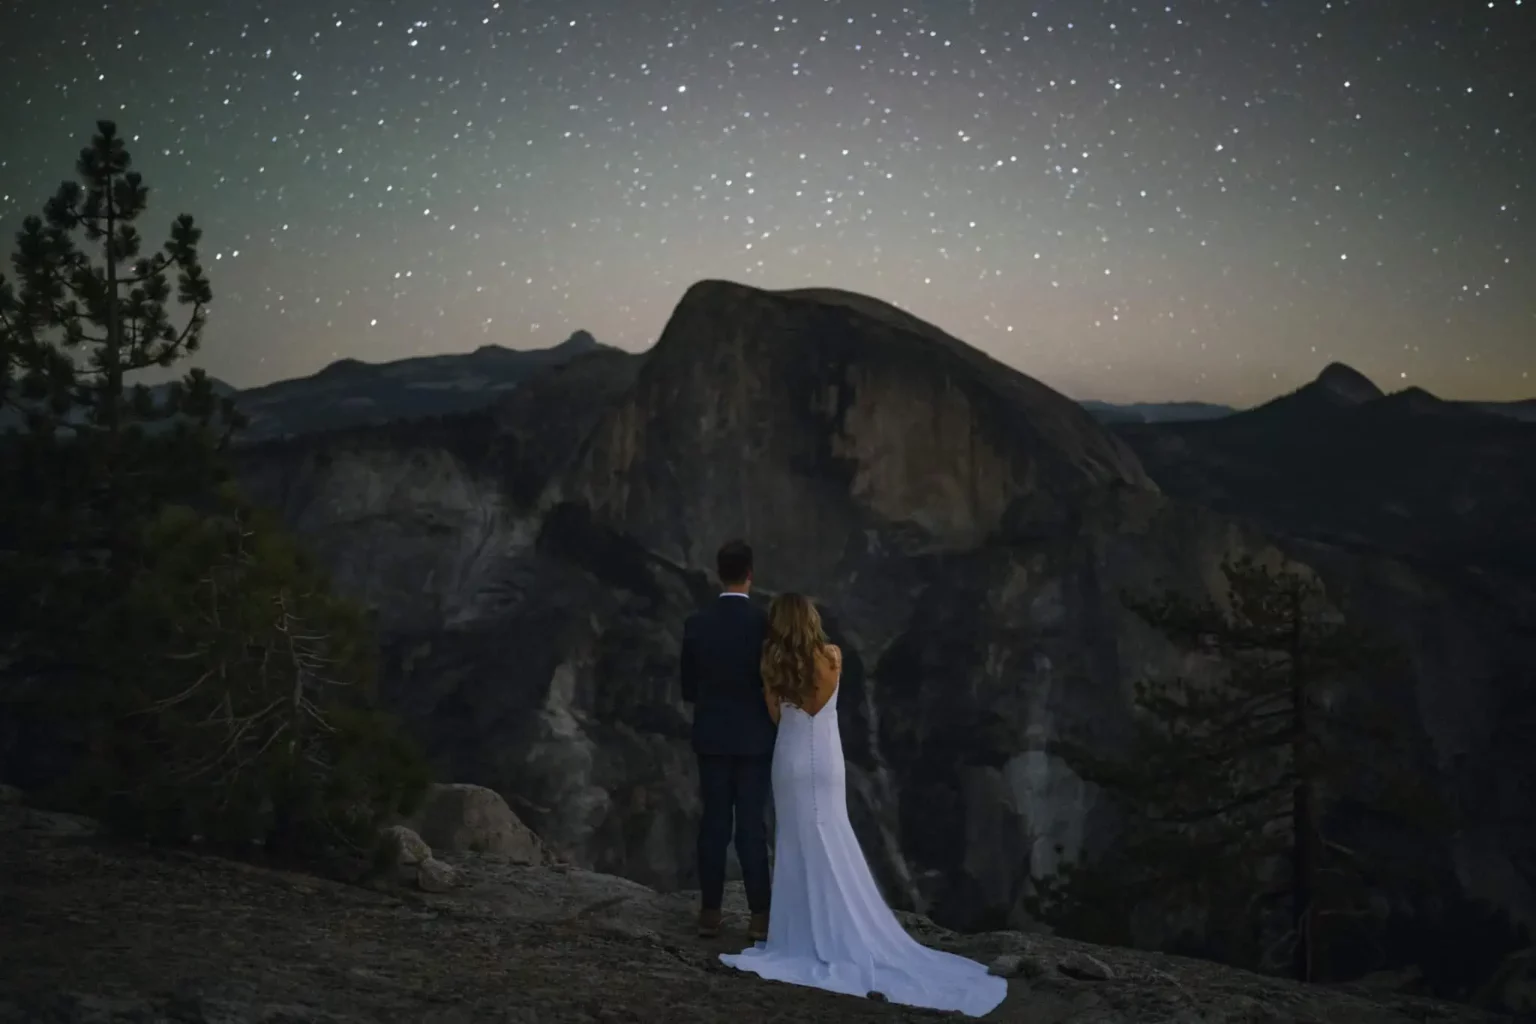 Couple star gazing for their elopement activity.